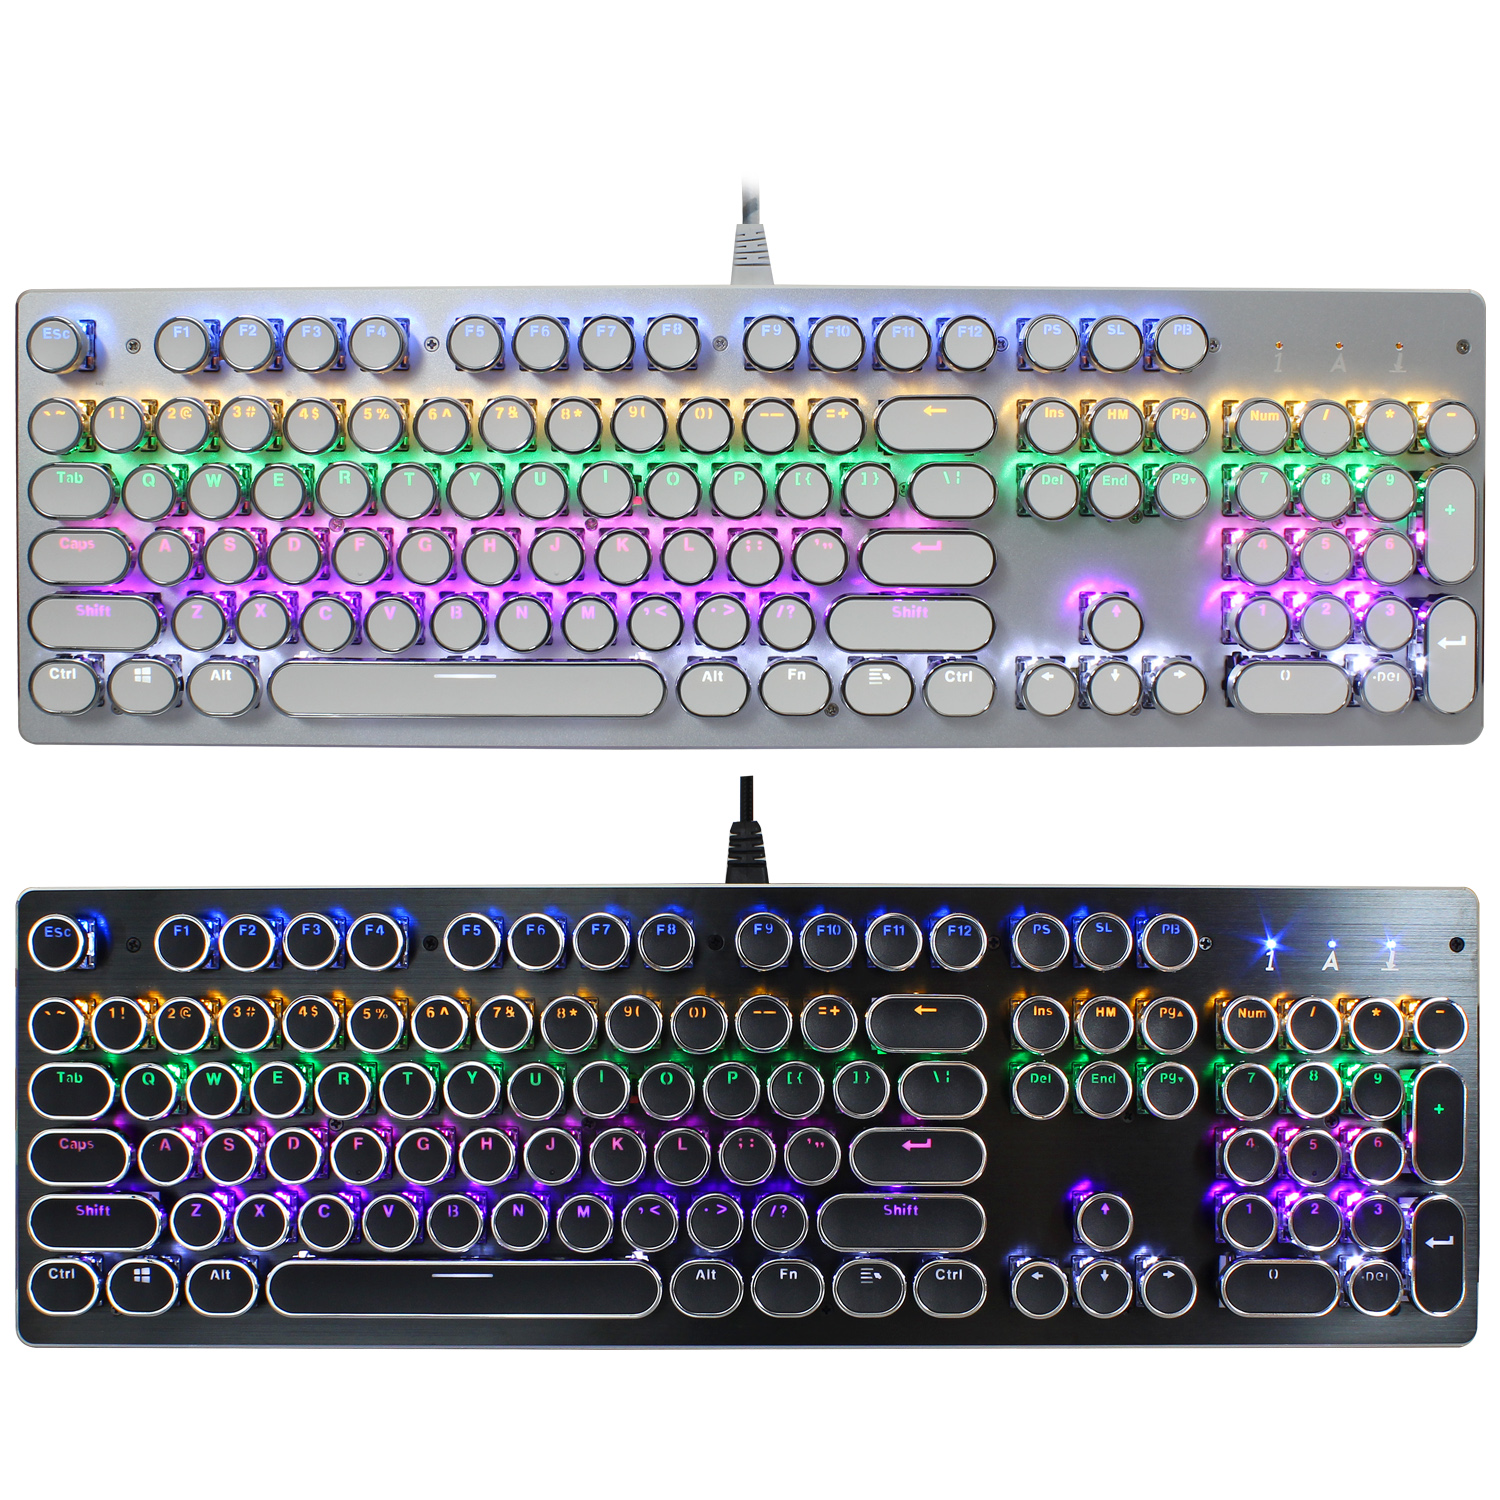 

HXSJ V800 104 key Wired High Special RGB LED Green Switch Mechanical Keyboard for PC Laptop